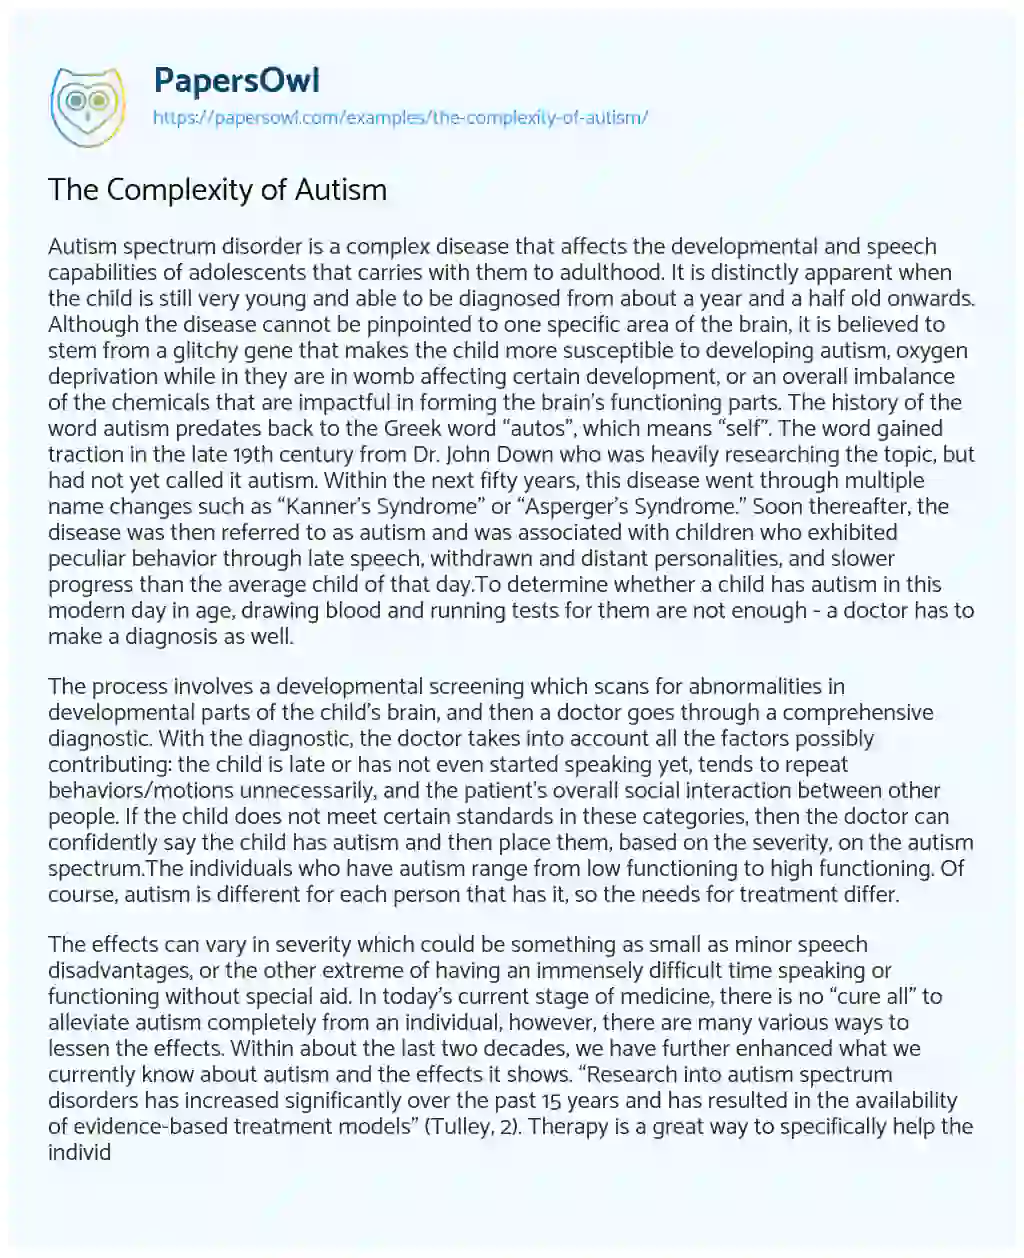 Essay on The Complexity of Autism